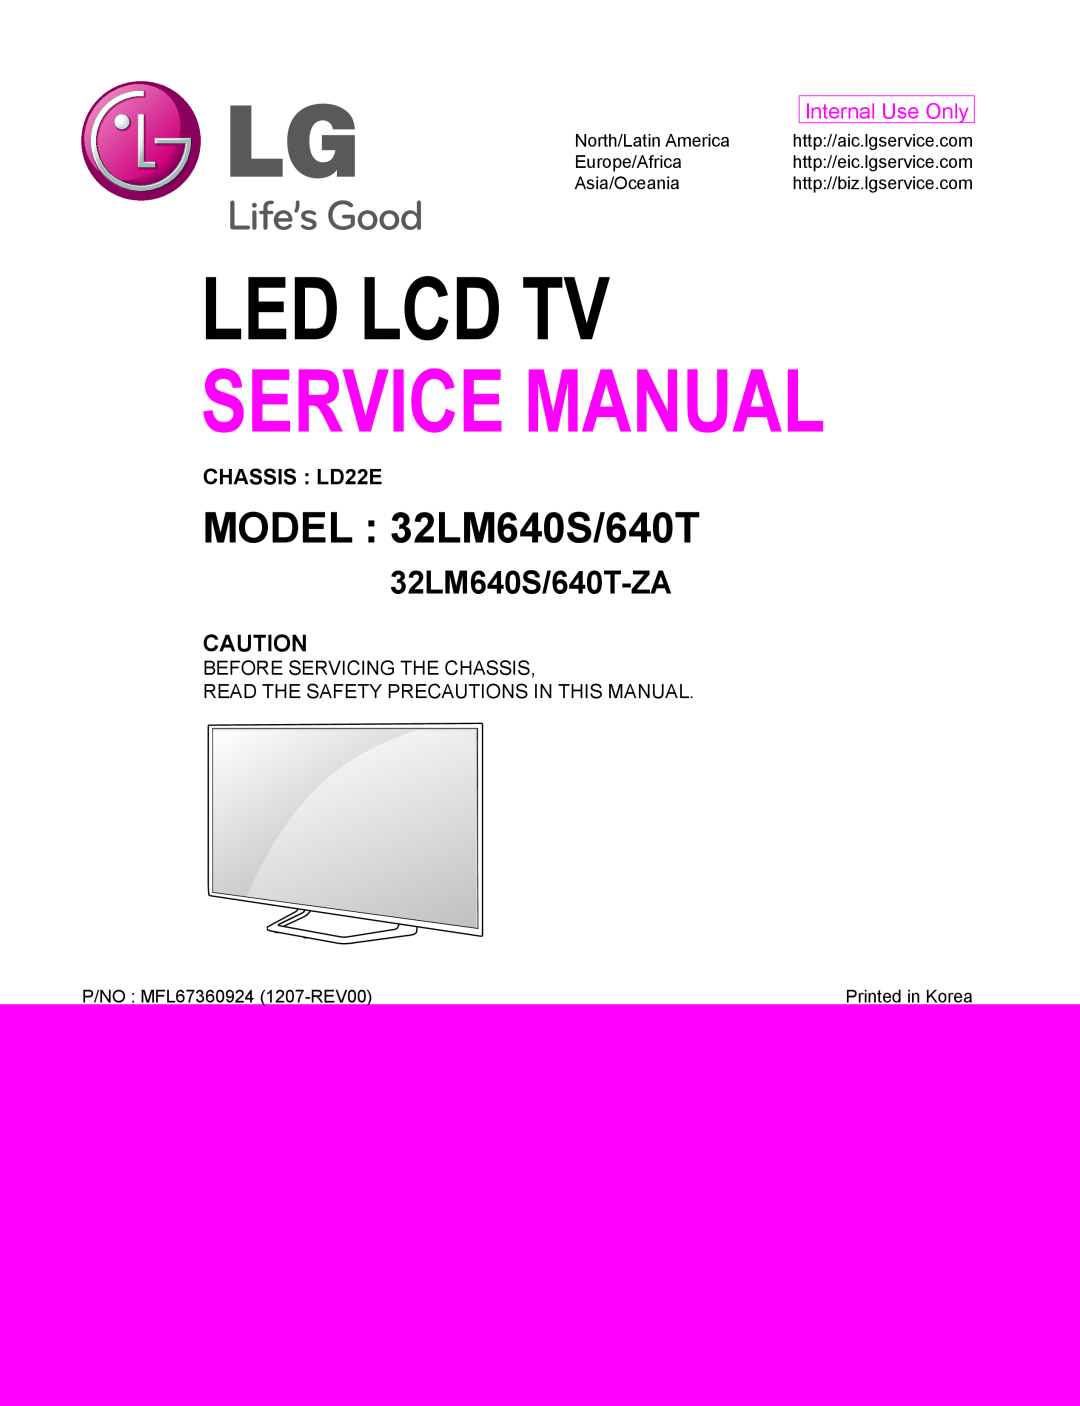 LG Electronics service manual MODEL 32LM640S/640T, 32LM640S/640T-ZA, Led Lcd Tv, Service Manual, Internal Use Only 